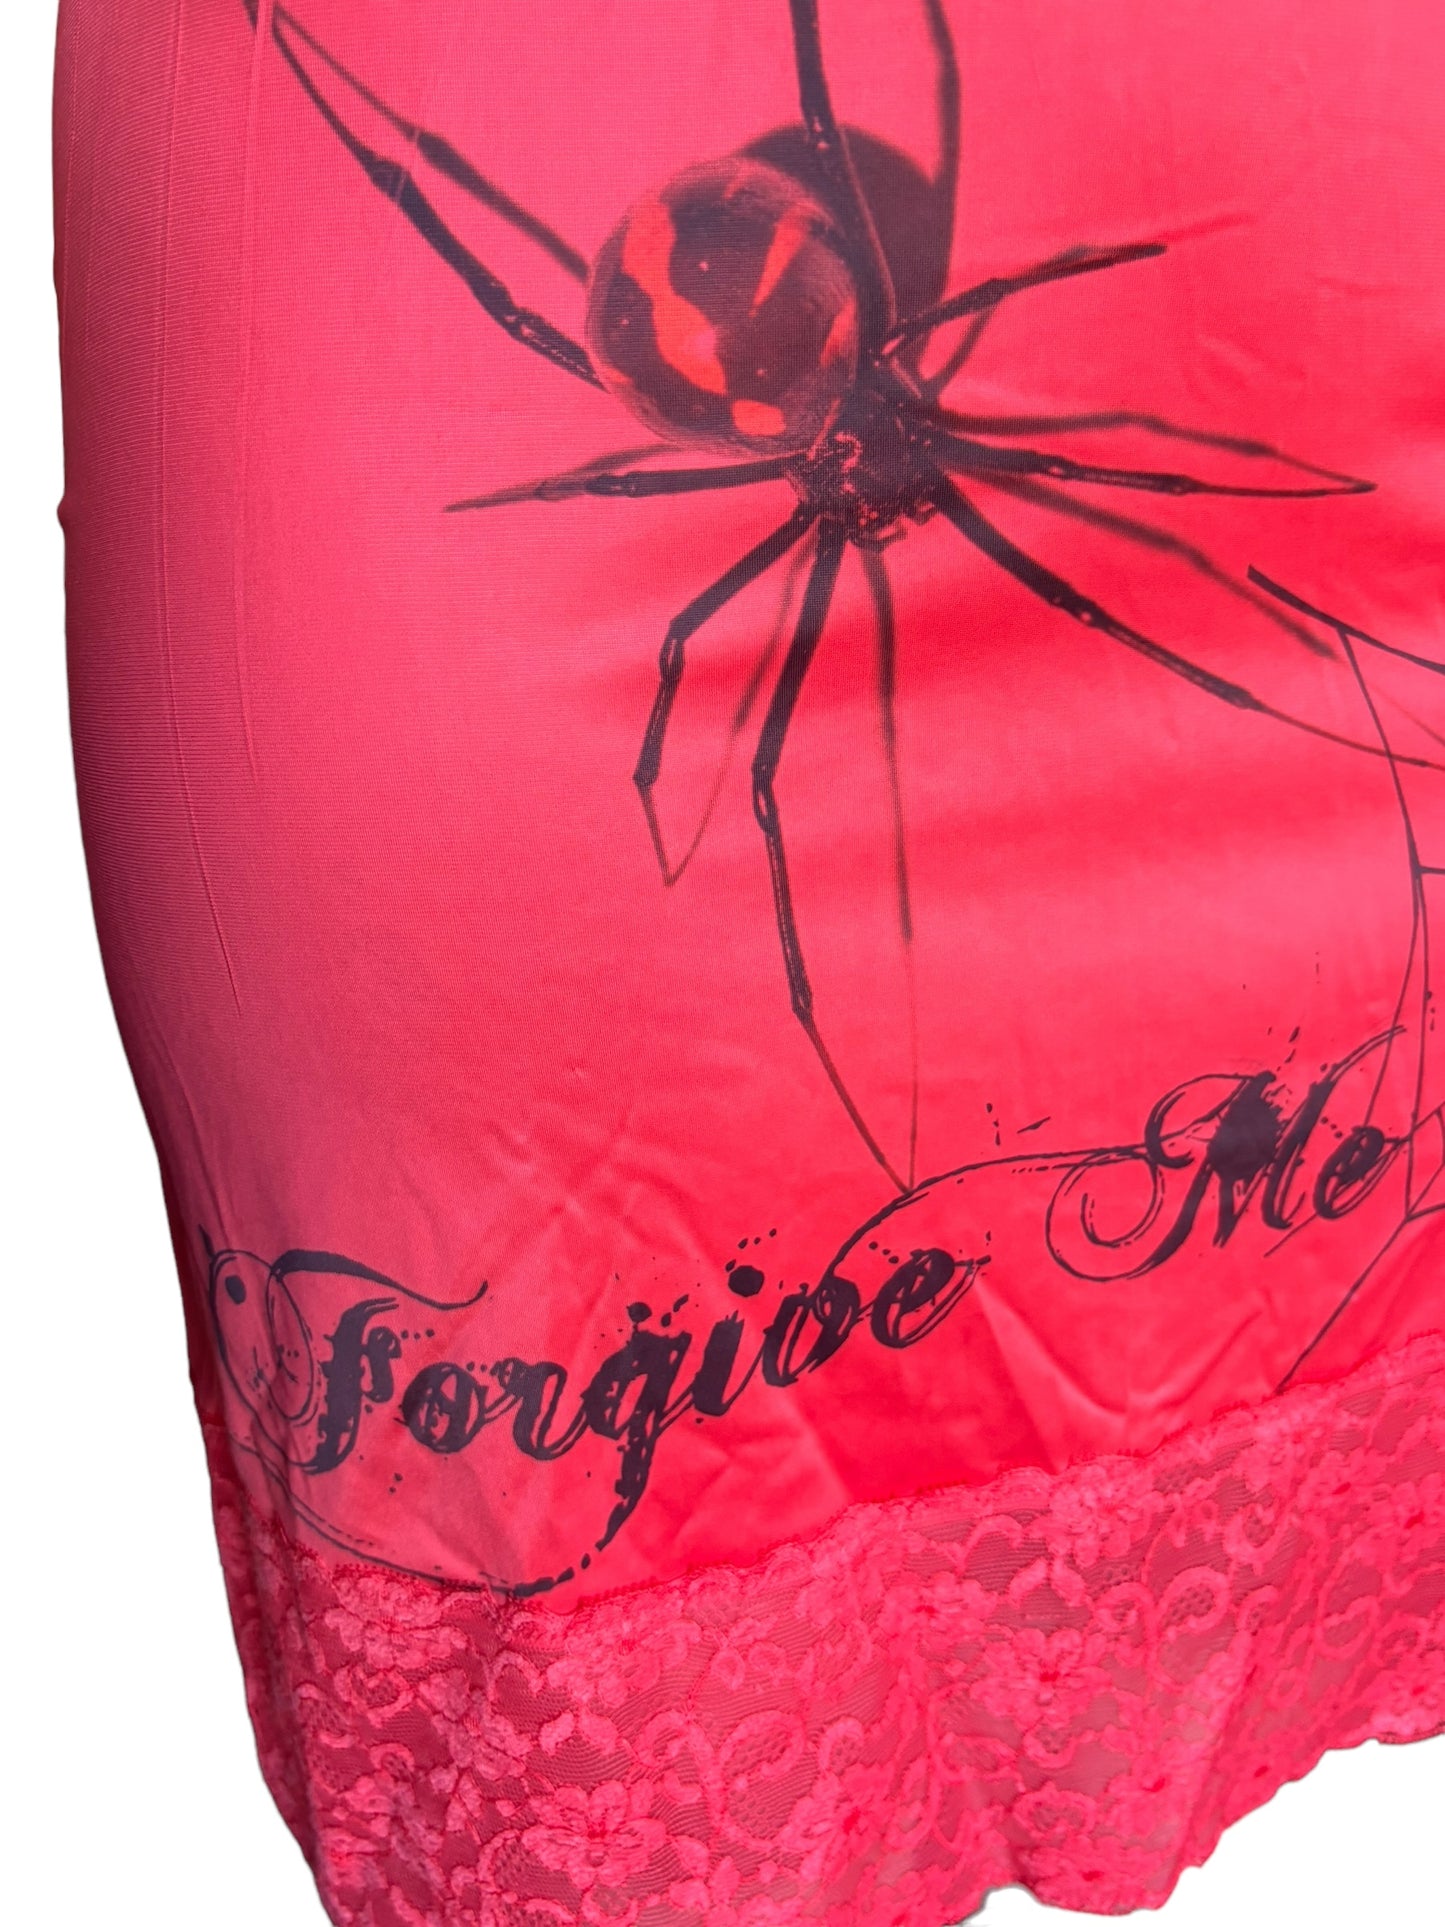 Forgive Me Red Skirt - S